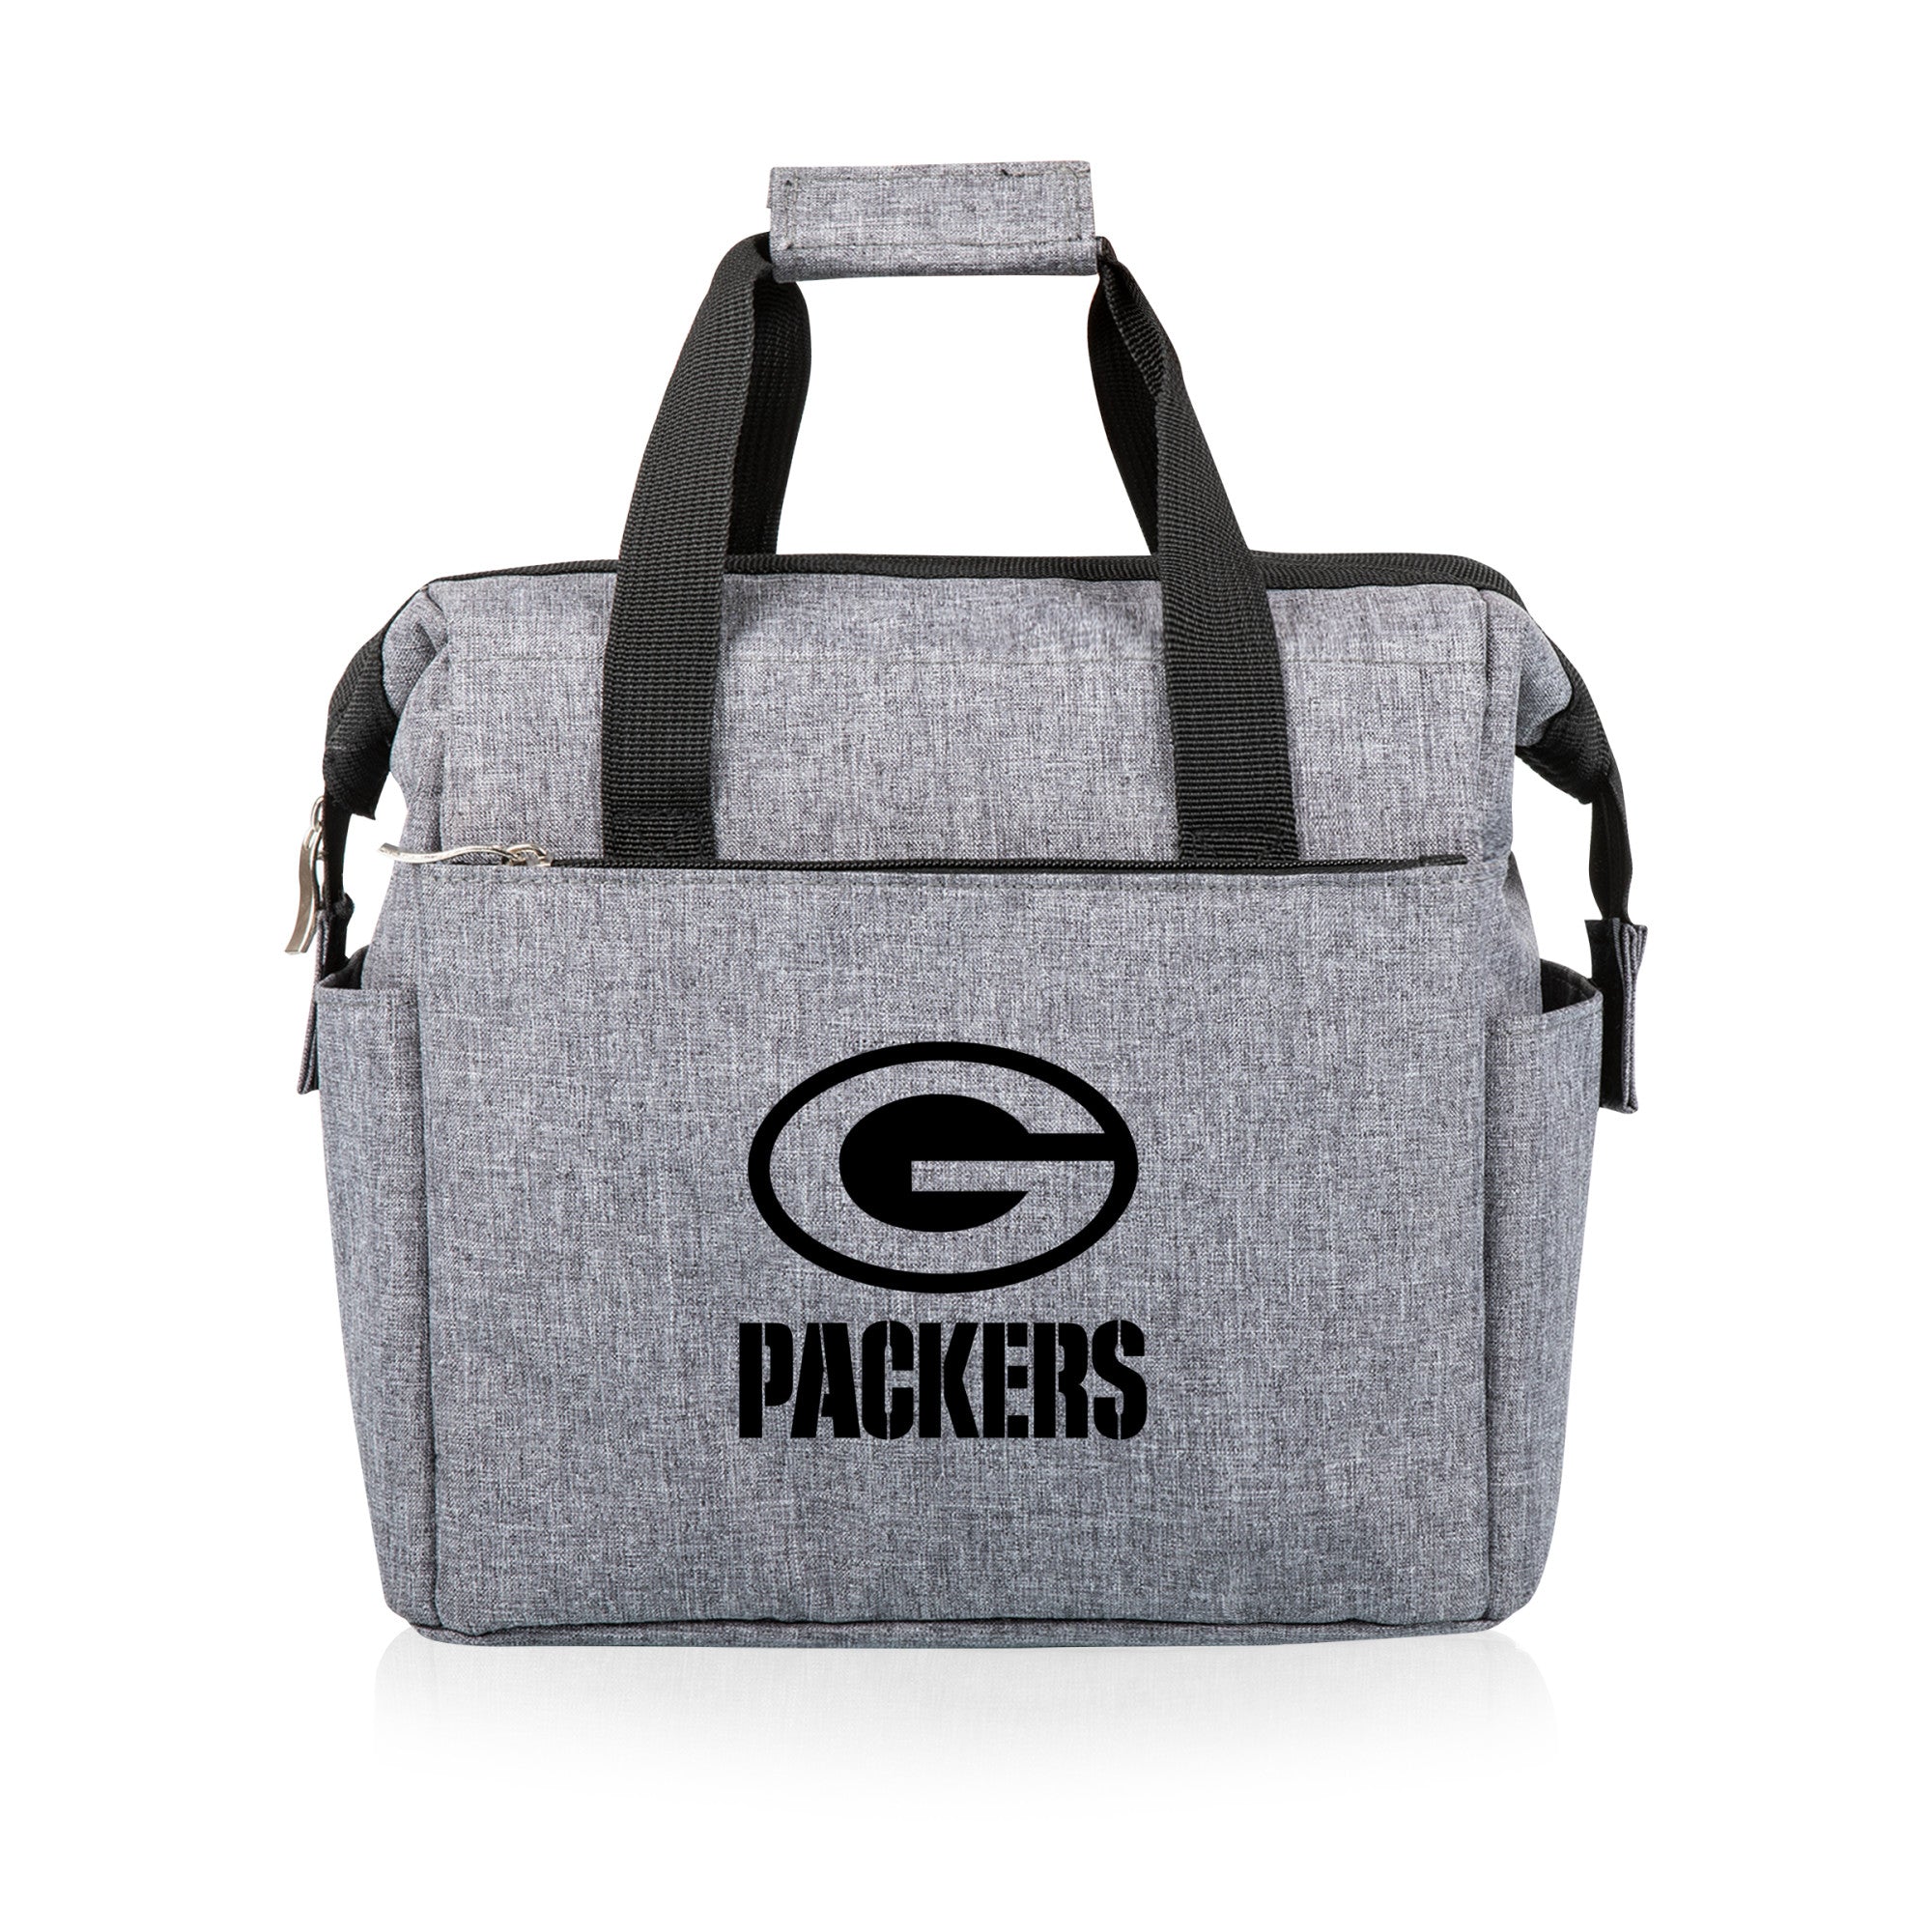 Green Bay Packers - On The Go Lunch Cooler, (Heathered Gray)